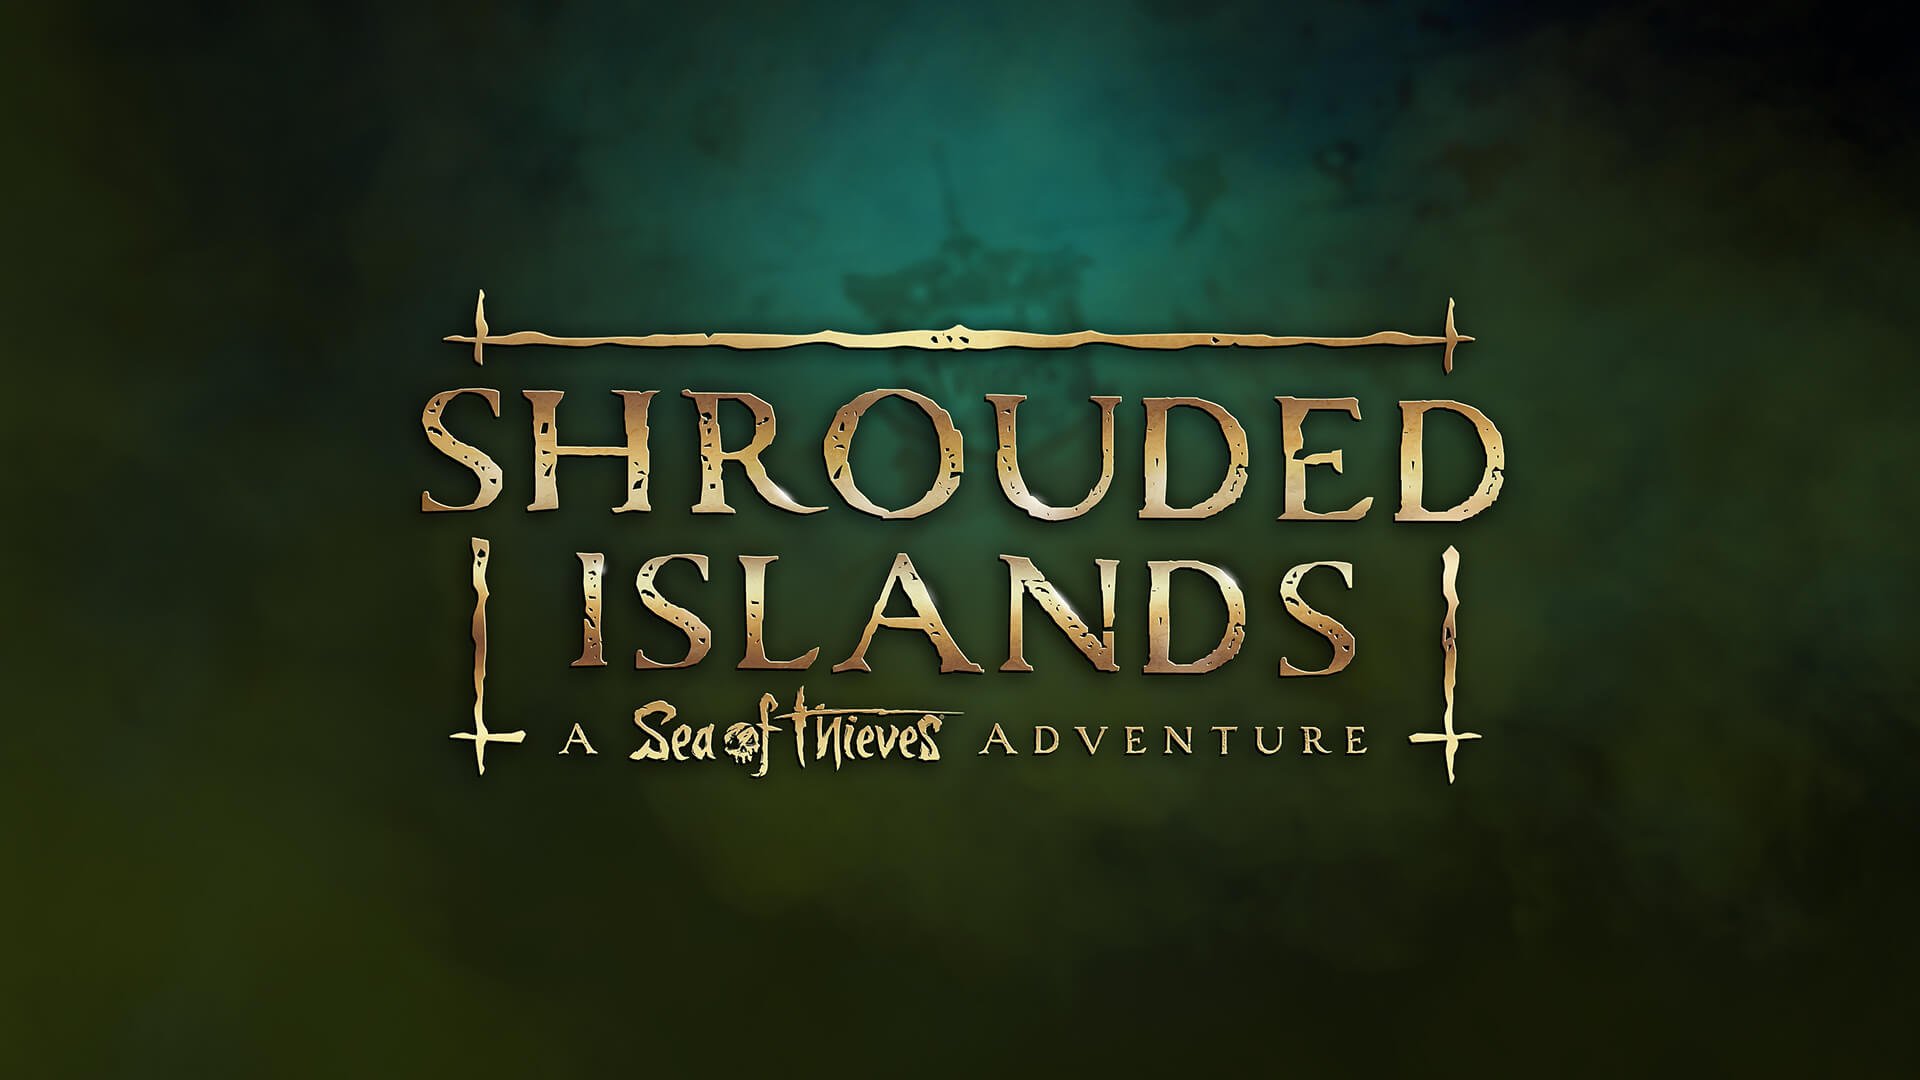 Video For Take on Sea of Thieves First Adventure in “Shrouded Islands,” Live Until March 3